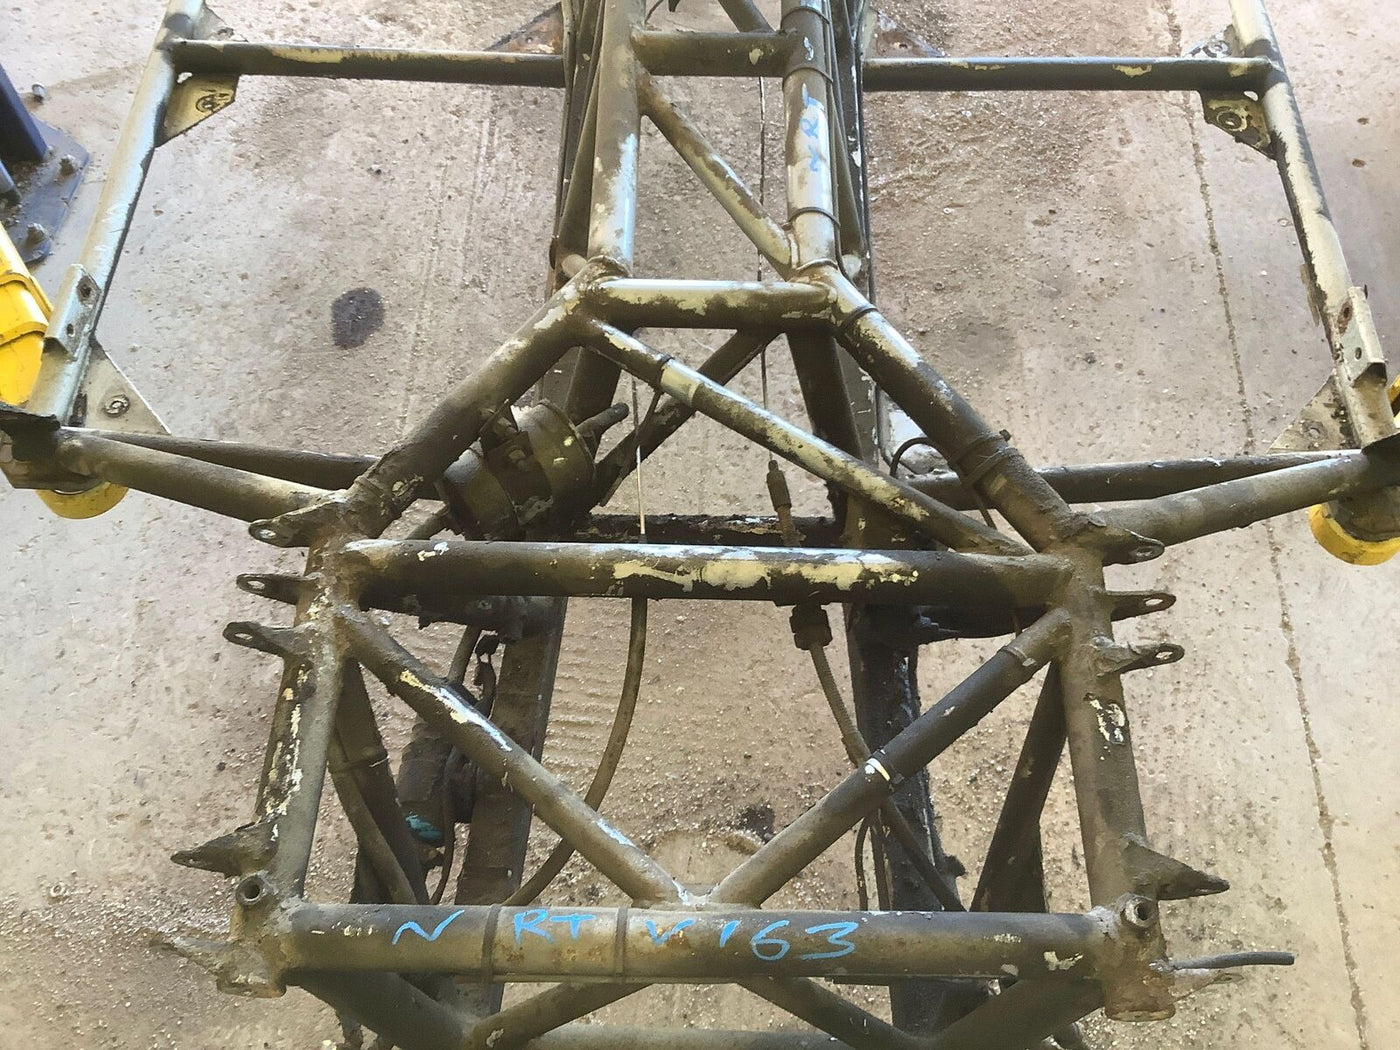 TVR Chimaera Tube Chassis Frame Complete OEM (NO Shipping - Pick Up ONLY)